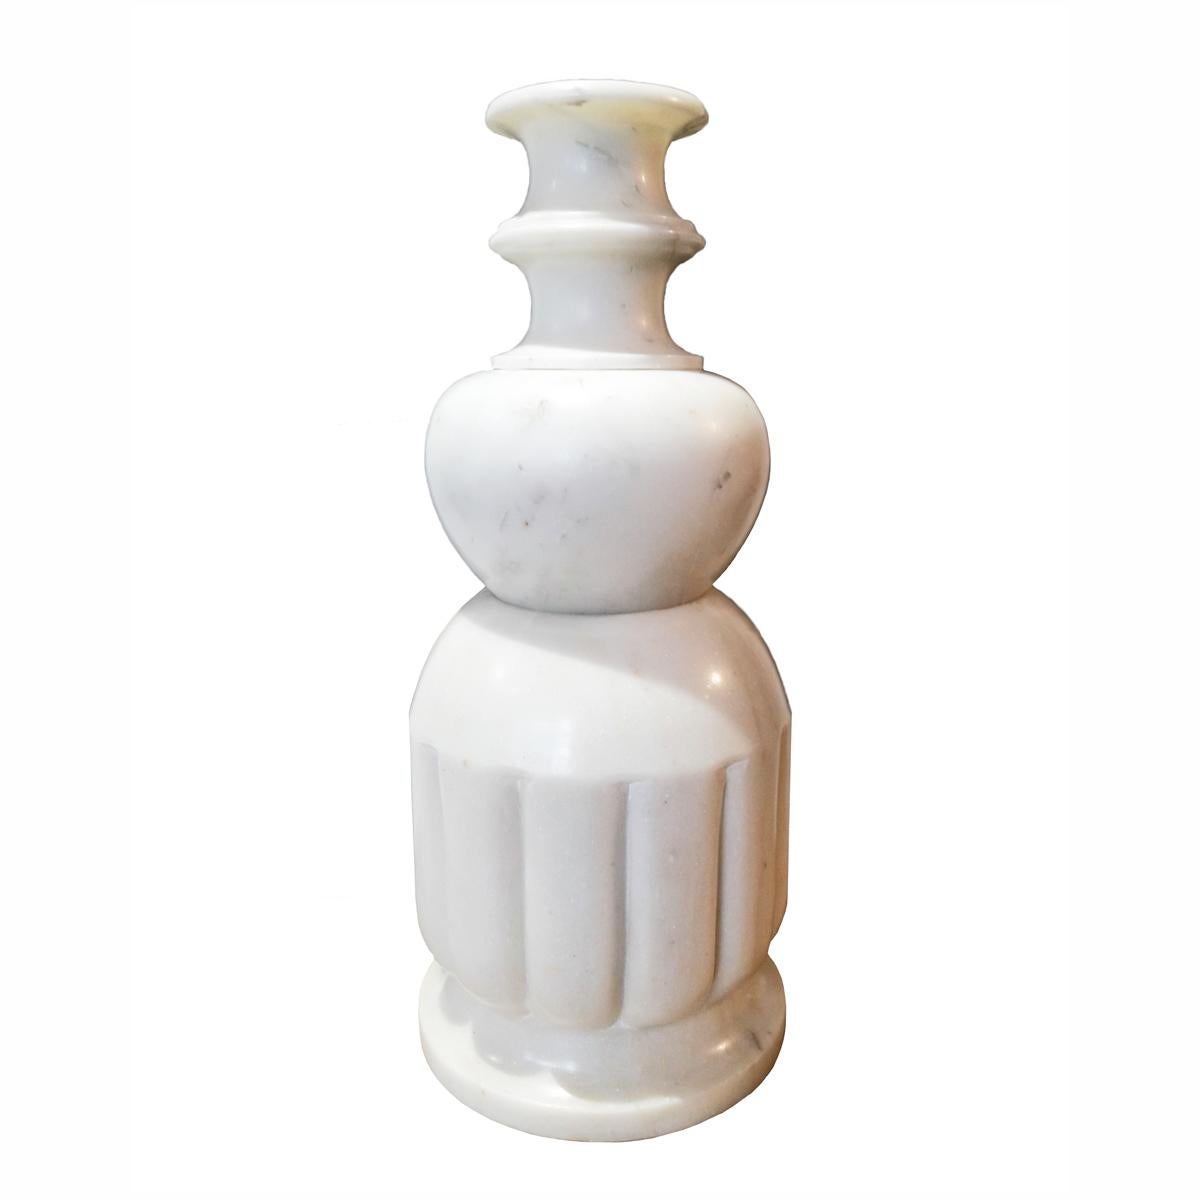 A tall marble vessel or vase, designed by renowned interior designer Vicente Wolf. 

This singular three-tier marble vessel is one of Wolf's signature home accessories. With its soft lines and smooth, sinuous body, this marble vase captures the